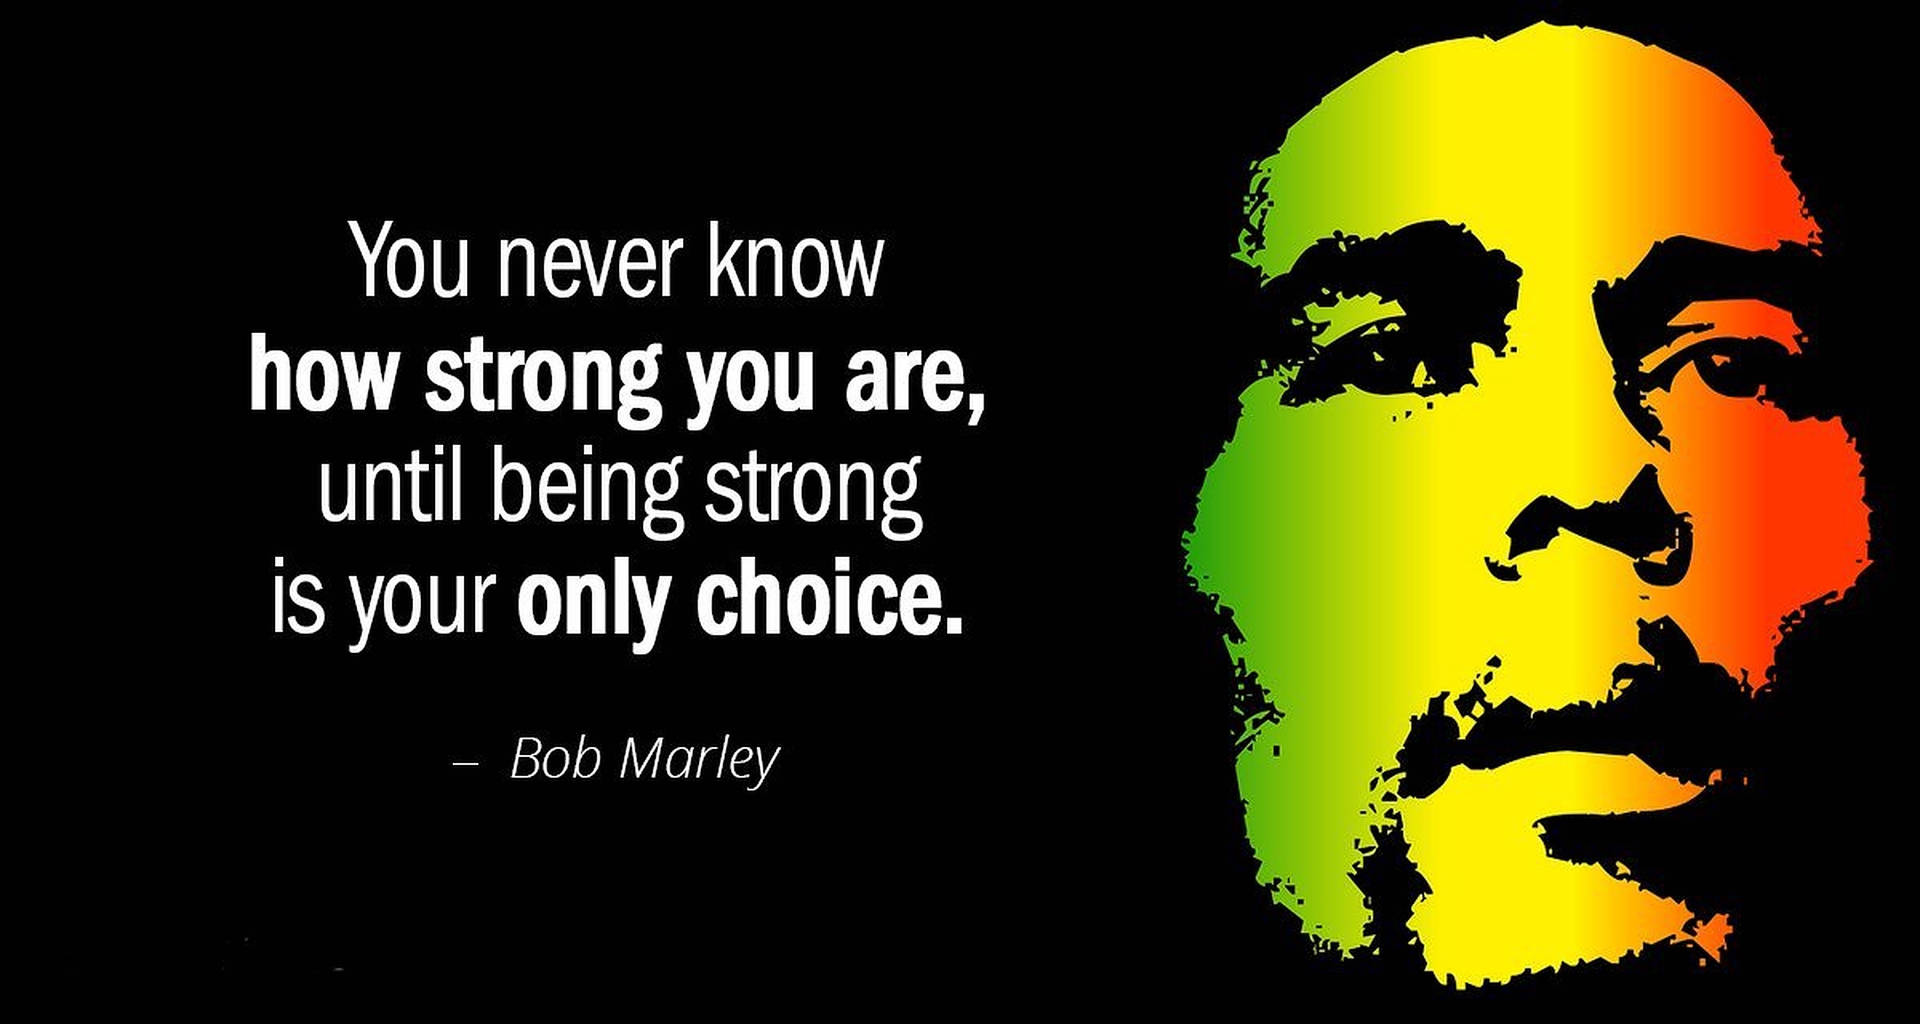 Bob Marley Quotes About Strength